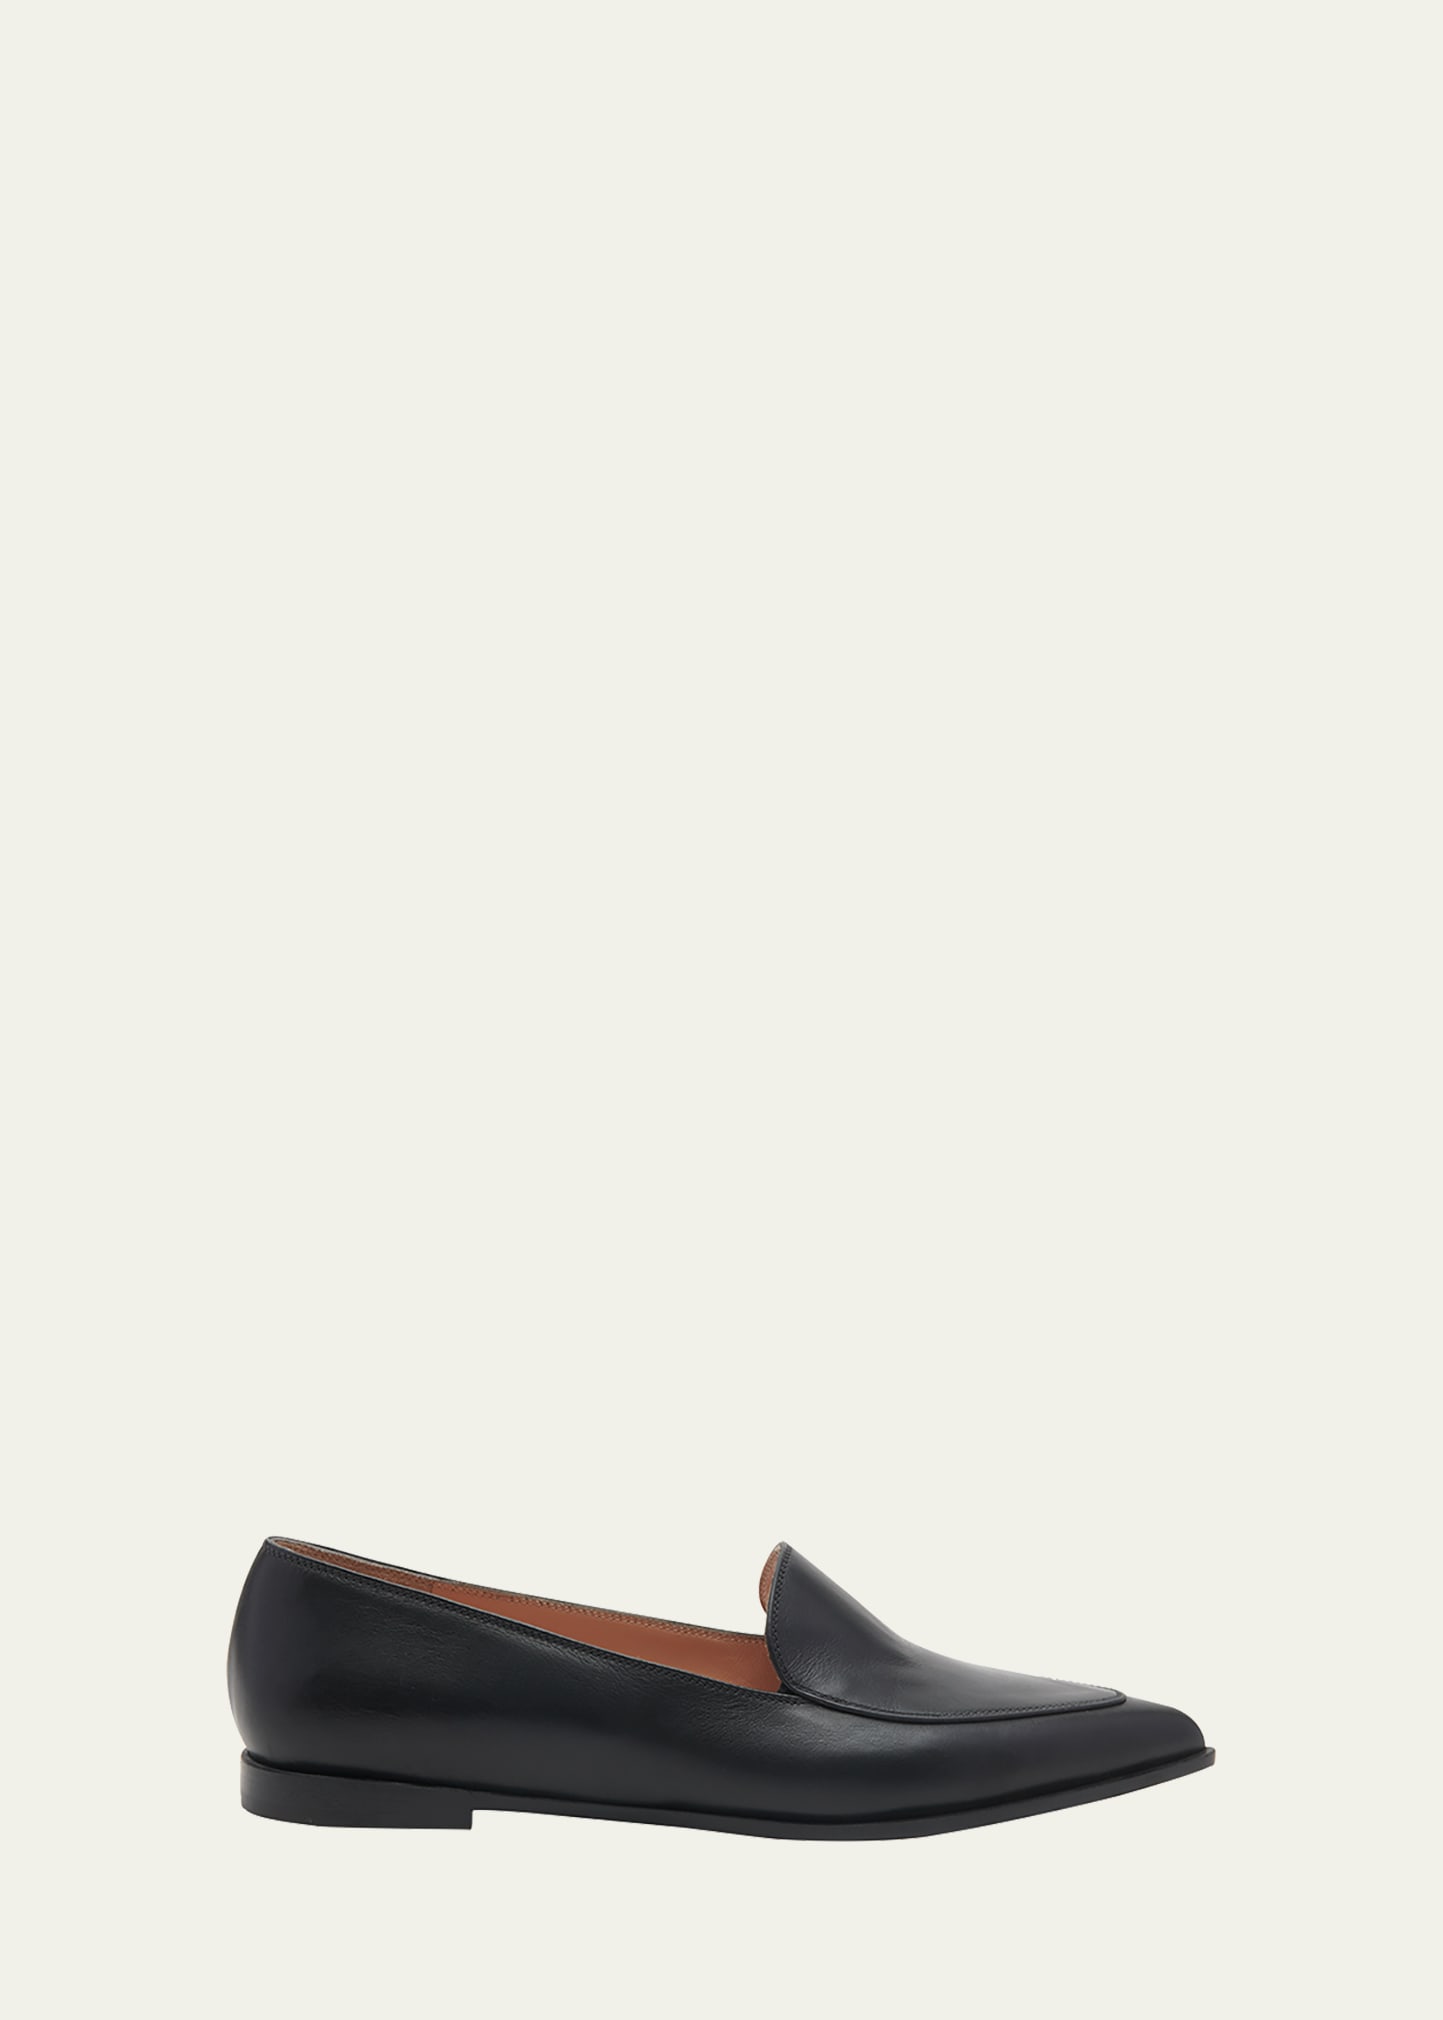 GIANVITO ROSSI LEATHER POINT-TOE BALLERINA LOAFERS